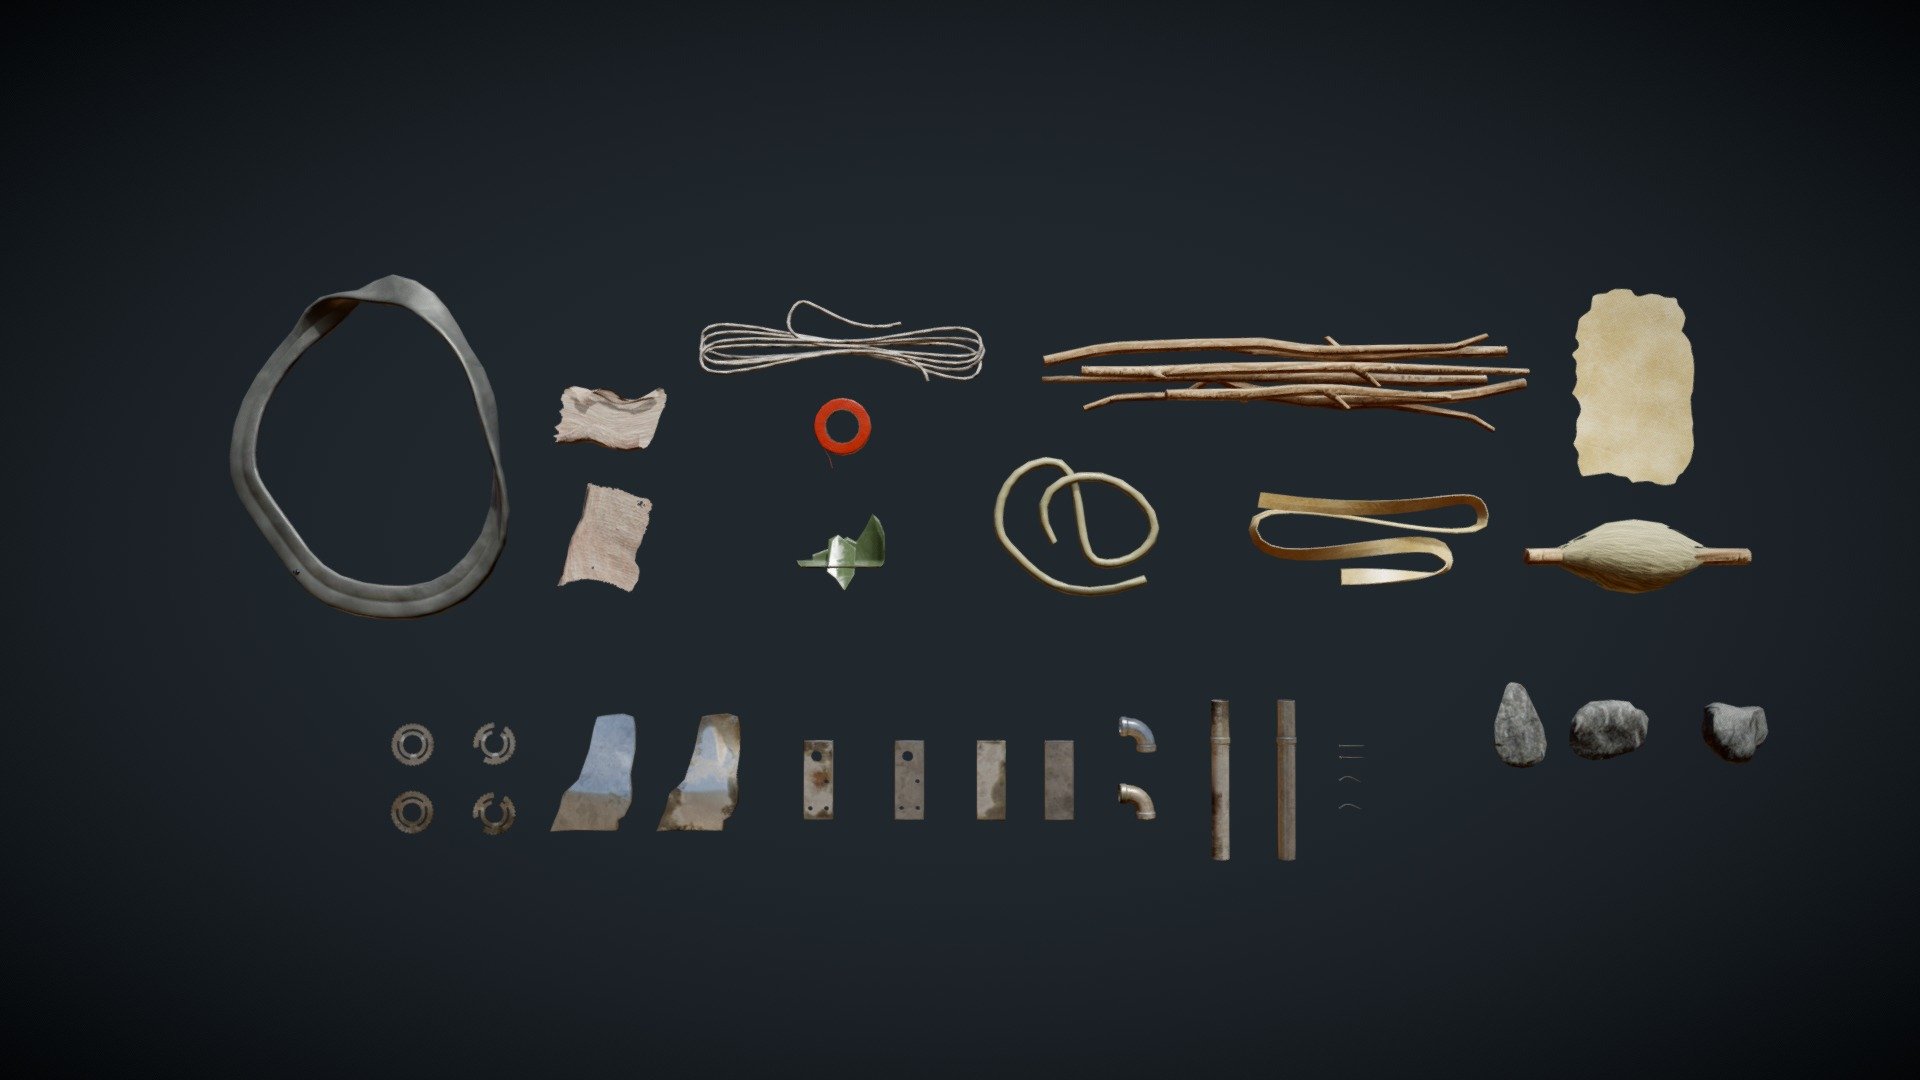 Crafting materials for survival games. 
Suitable for modern or natural environments, zombie apocalypse etc 3d model